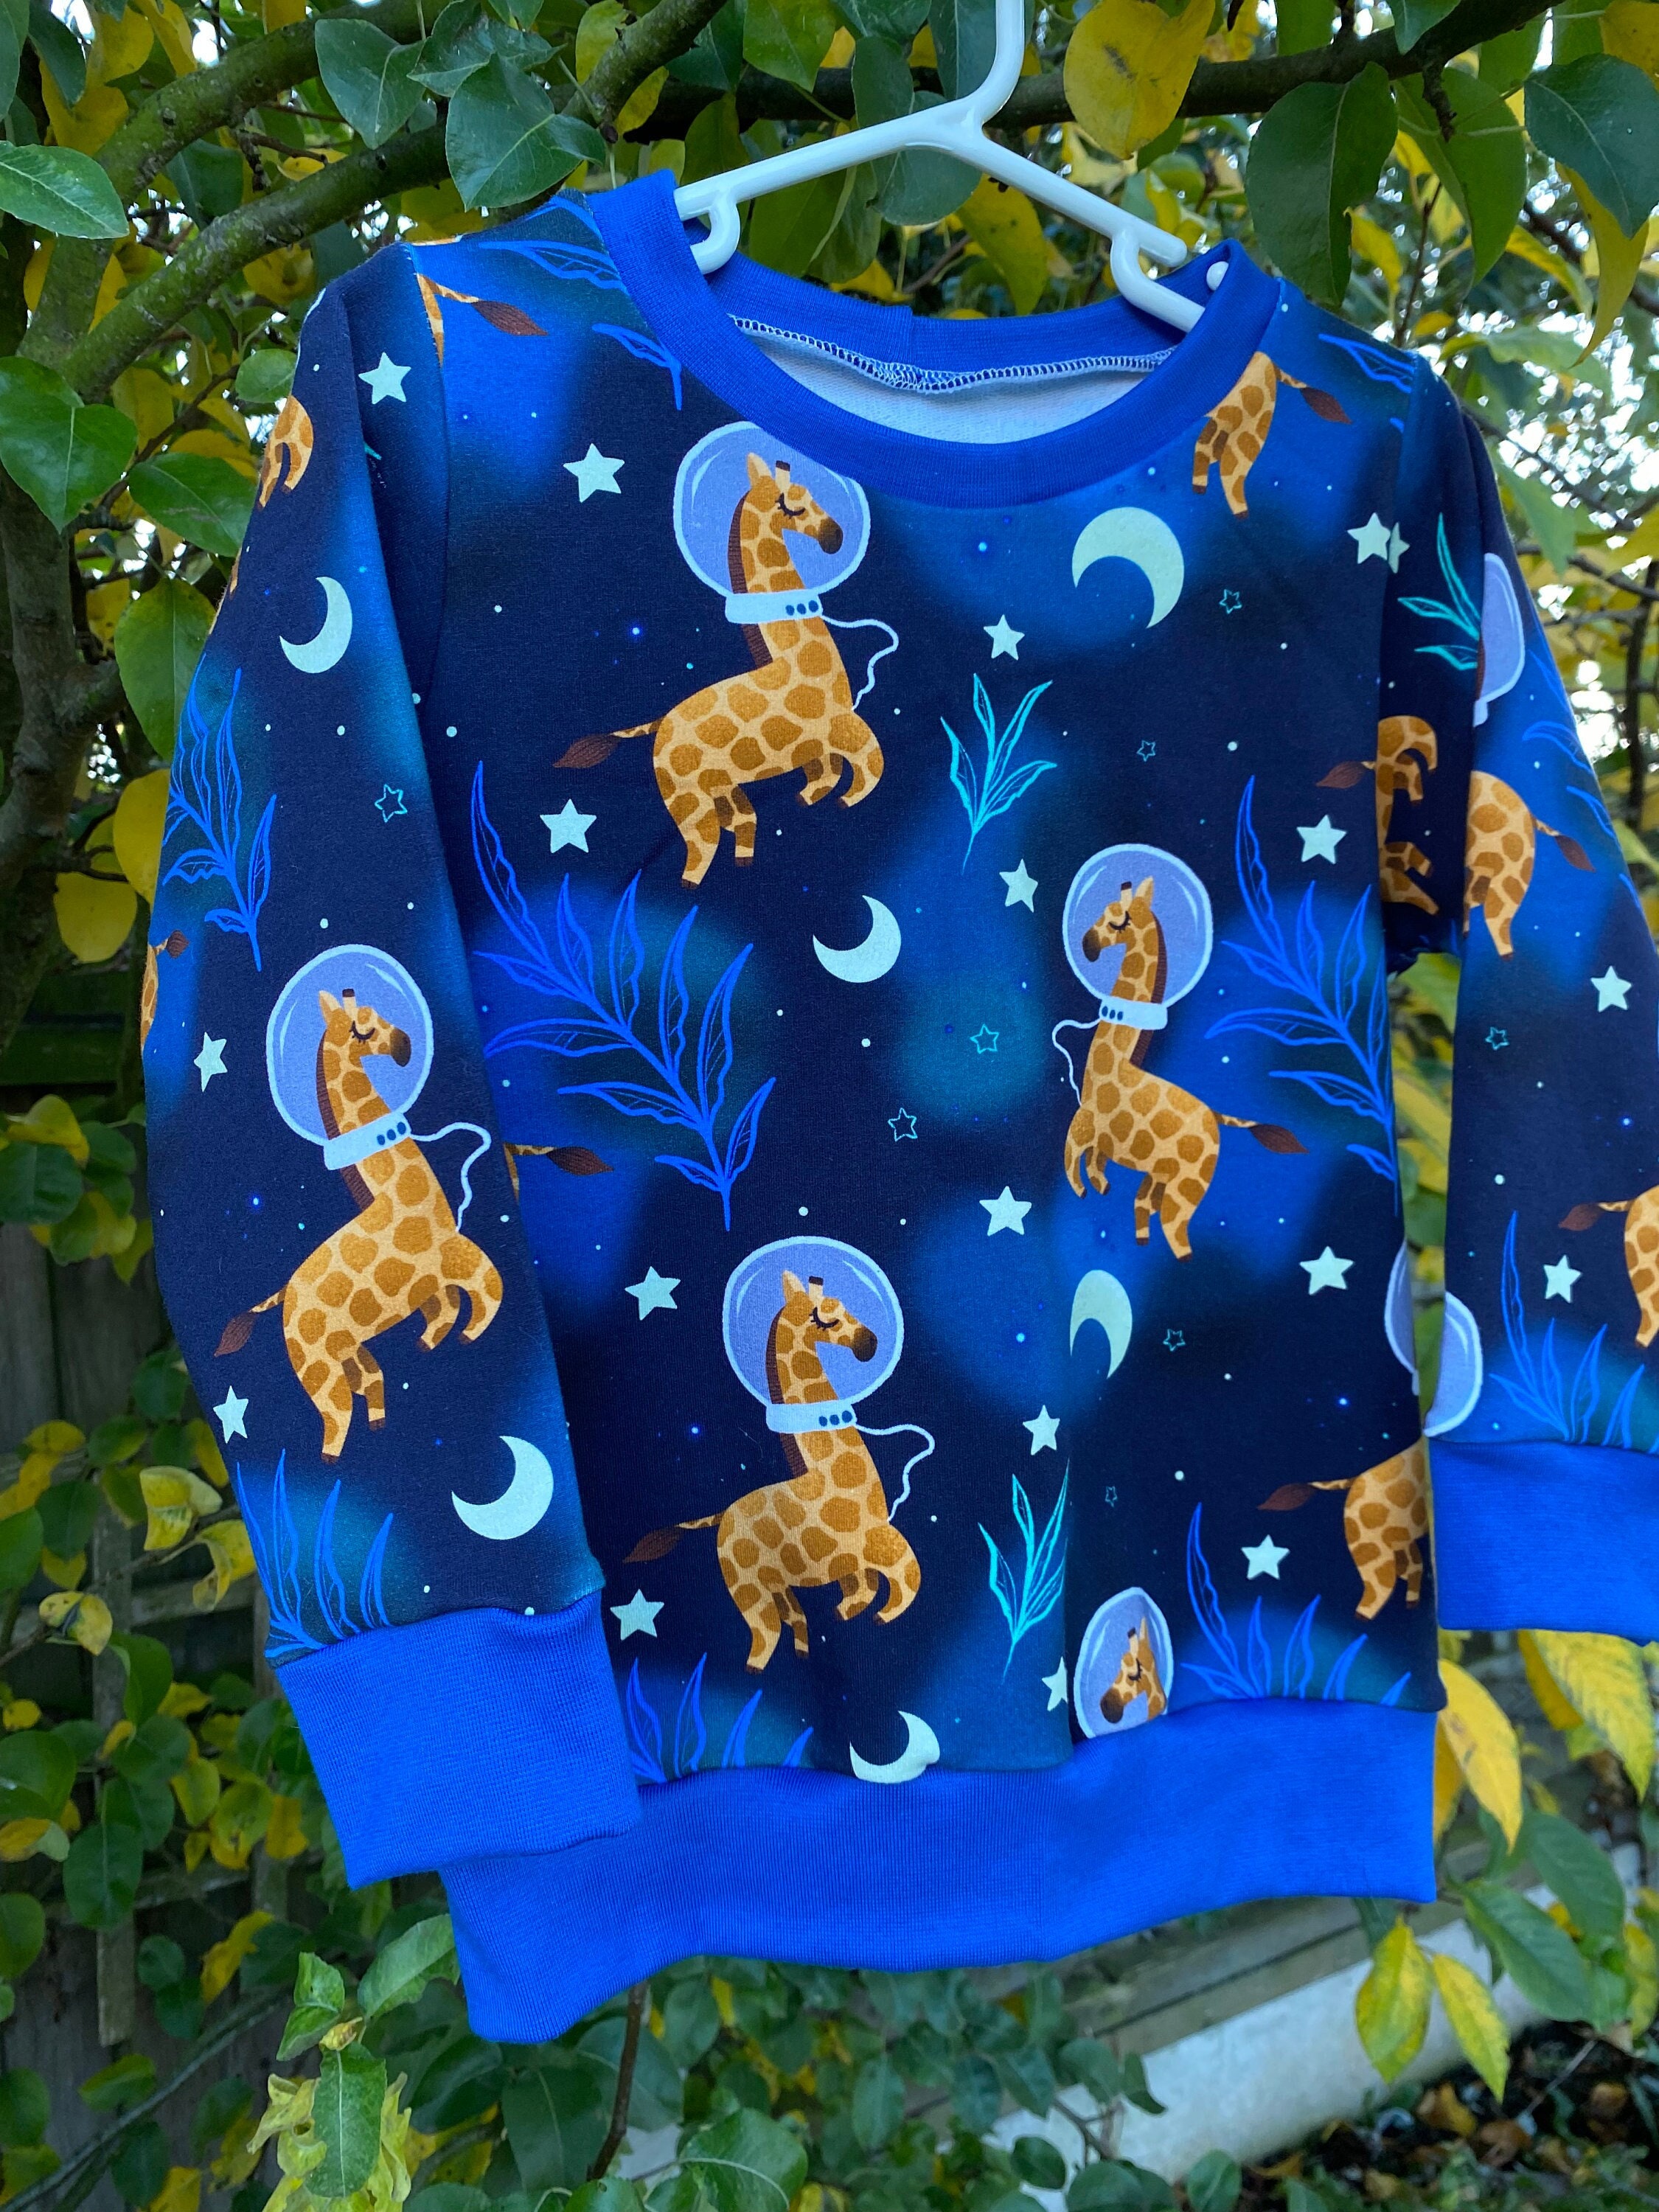 Cosmic Kids Clothes 